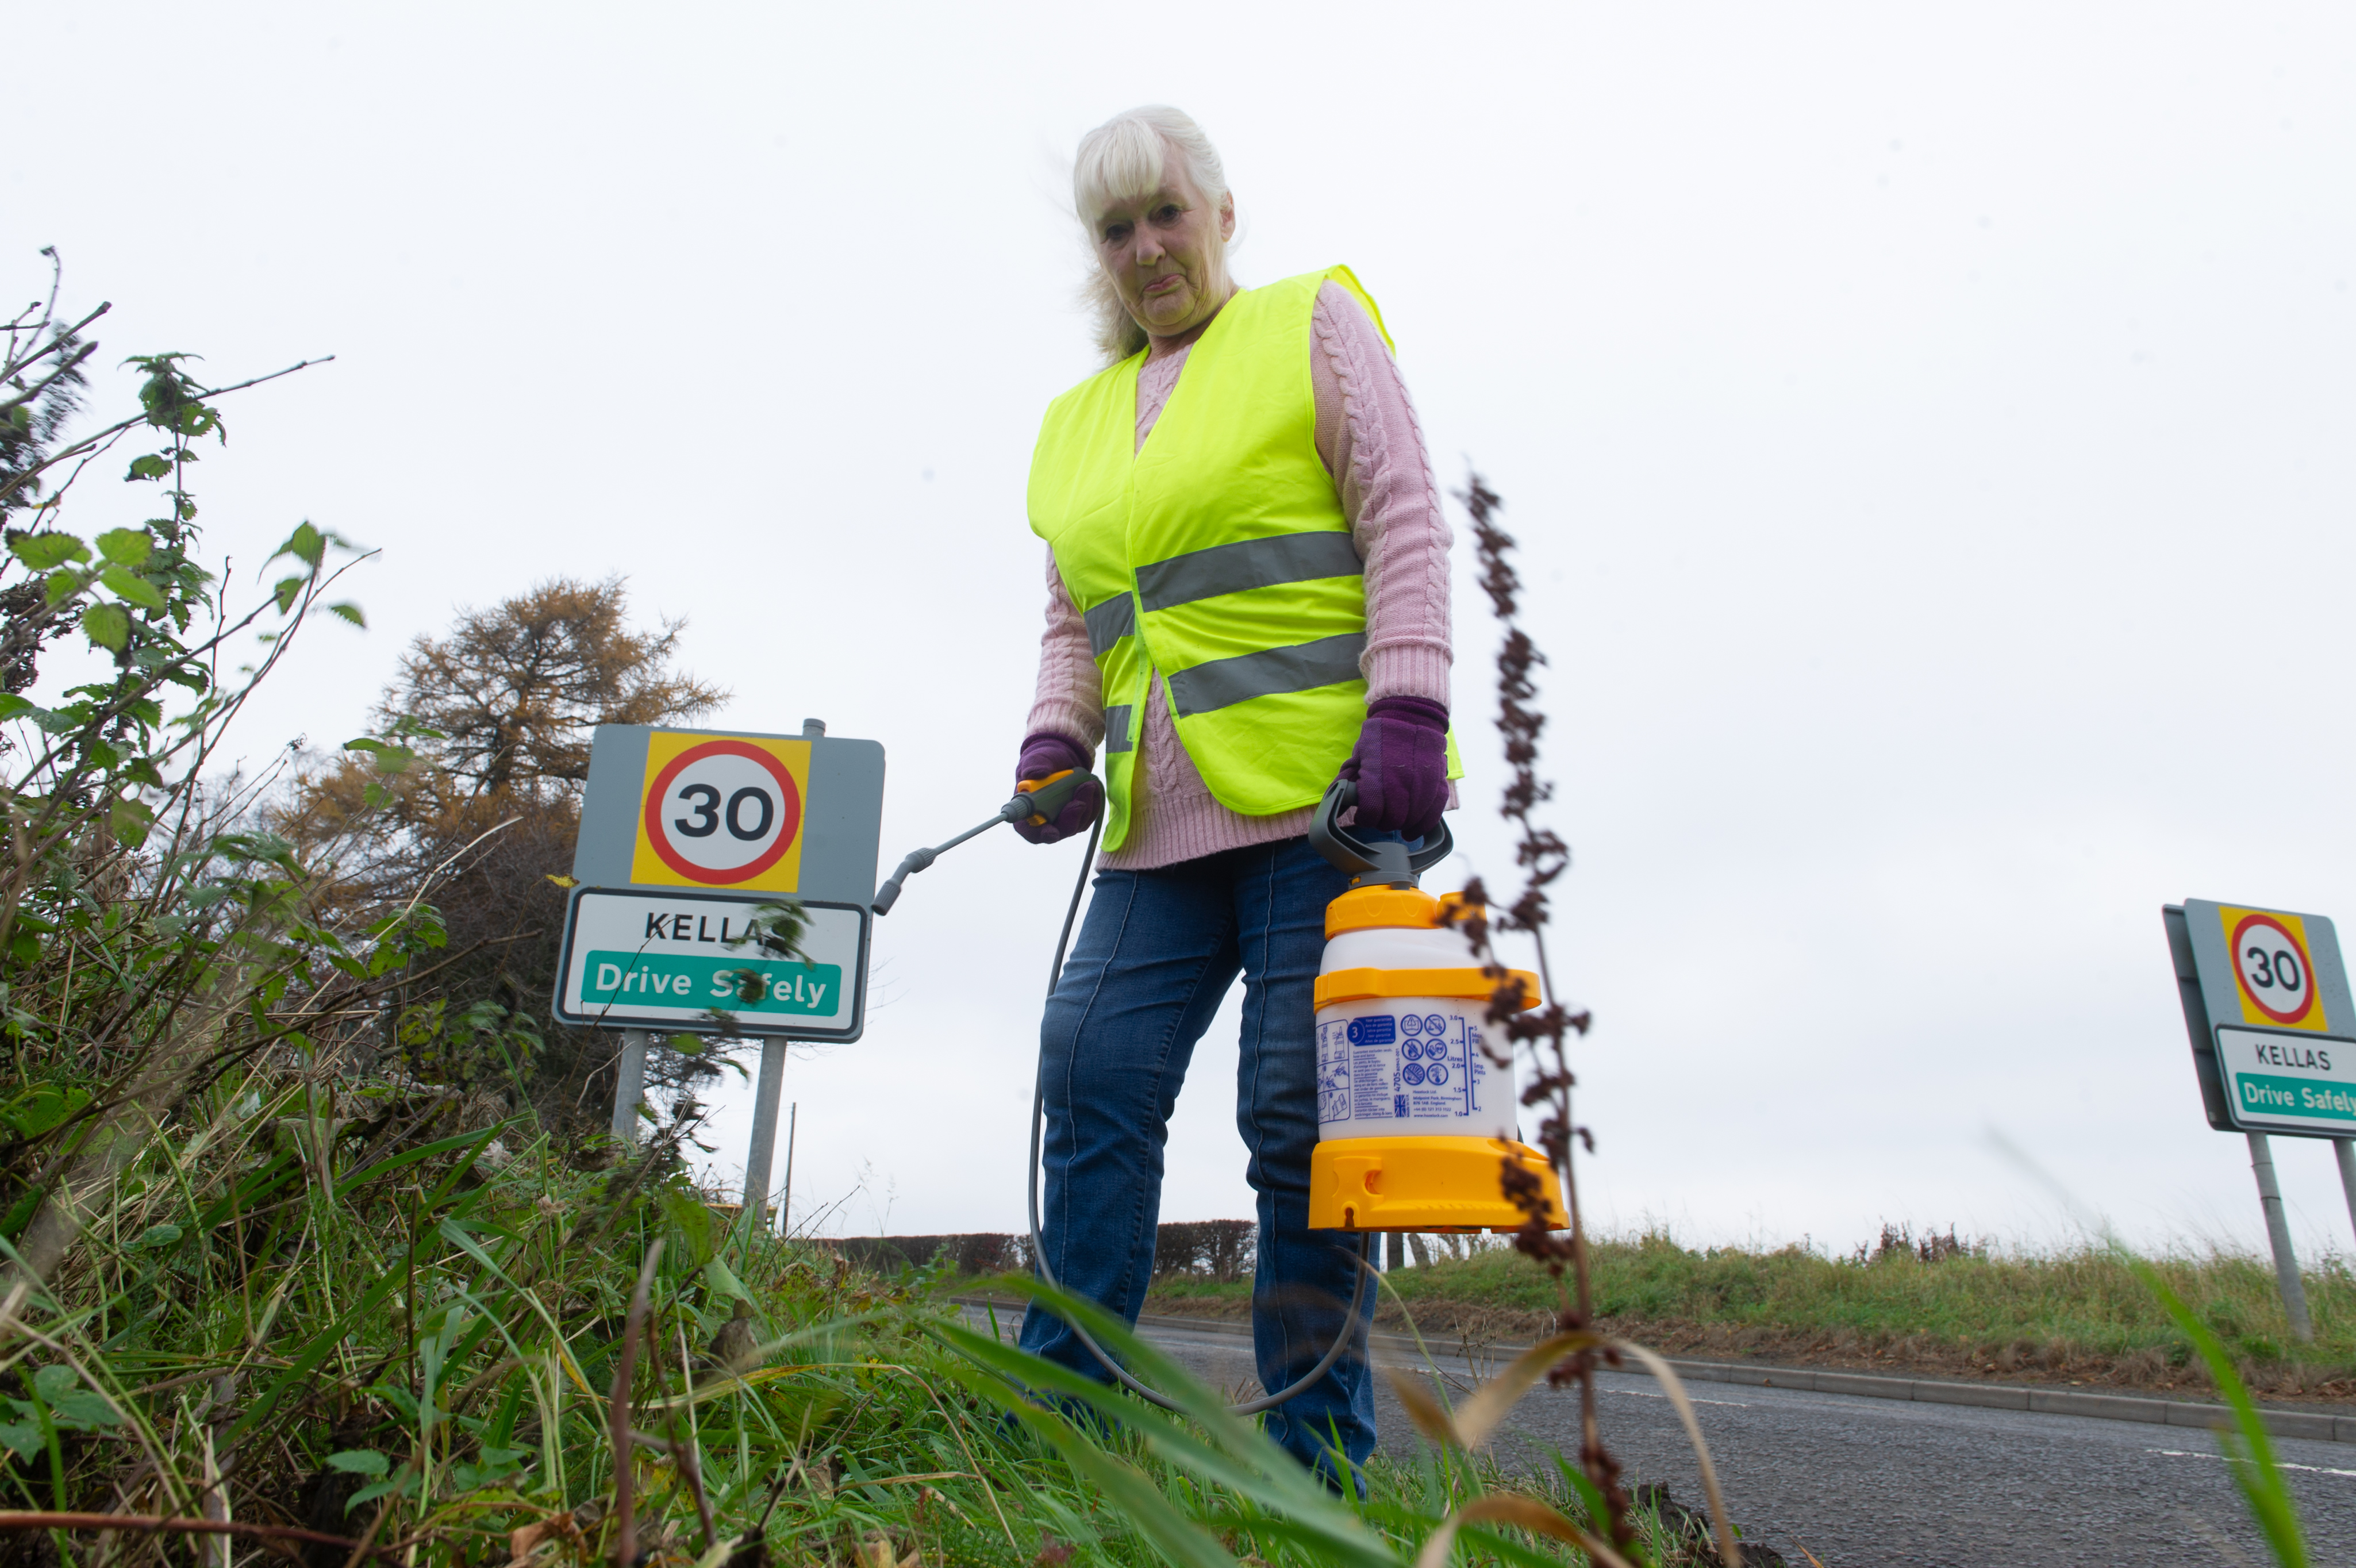 Villager Marilyn Mauran has previously taken matters into her own hands and cut back vegetation covering speed limit signs